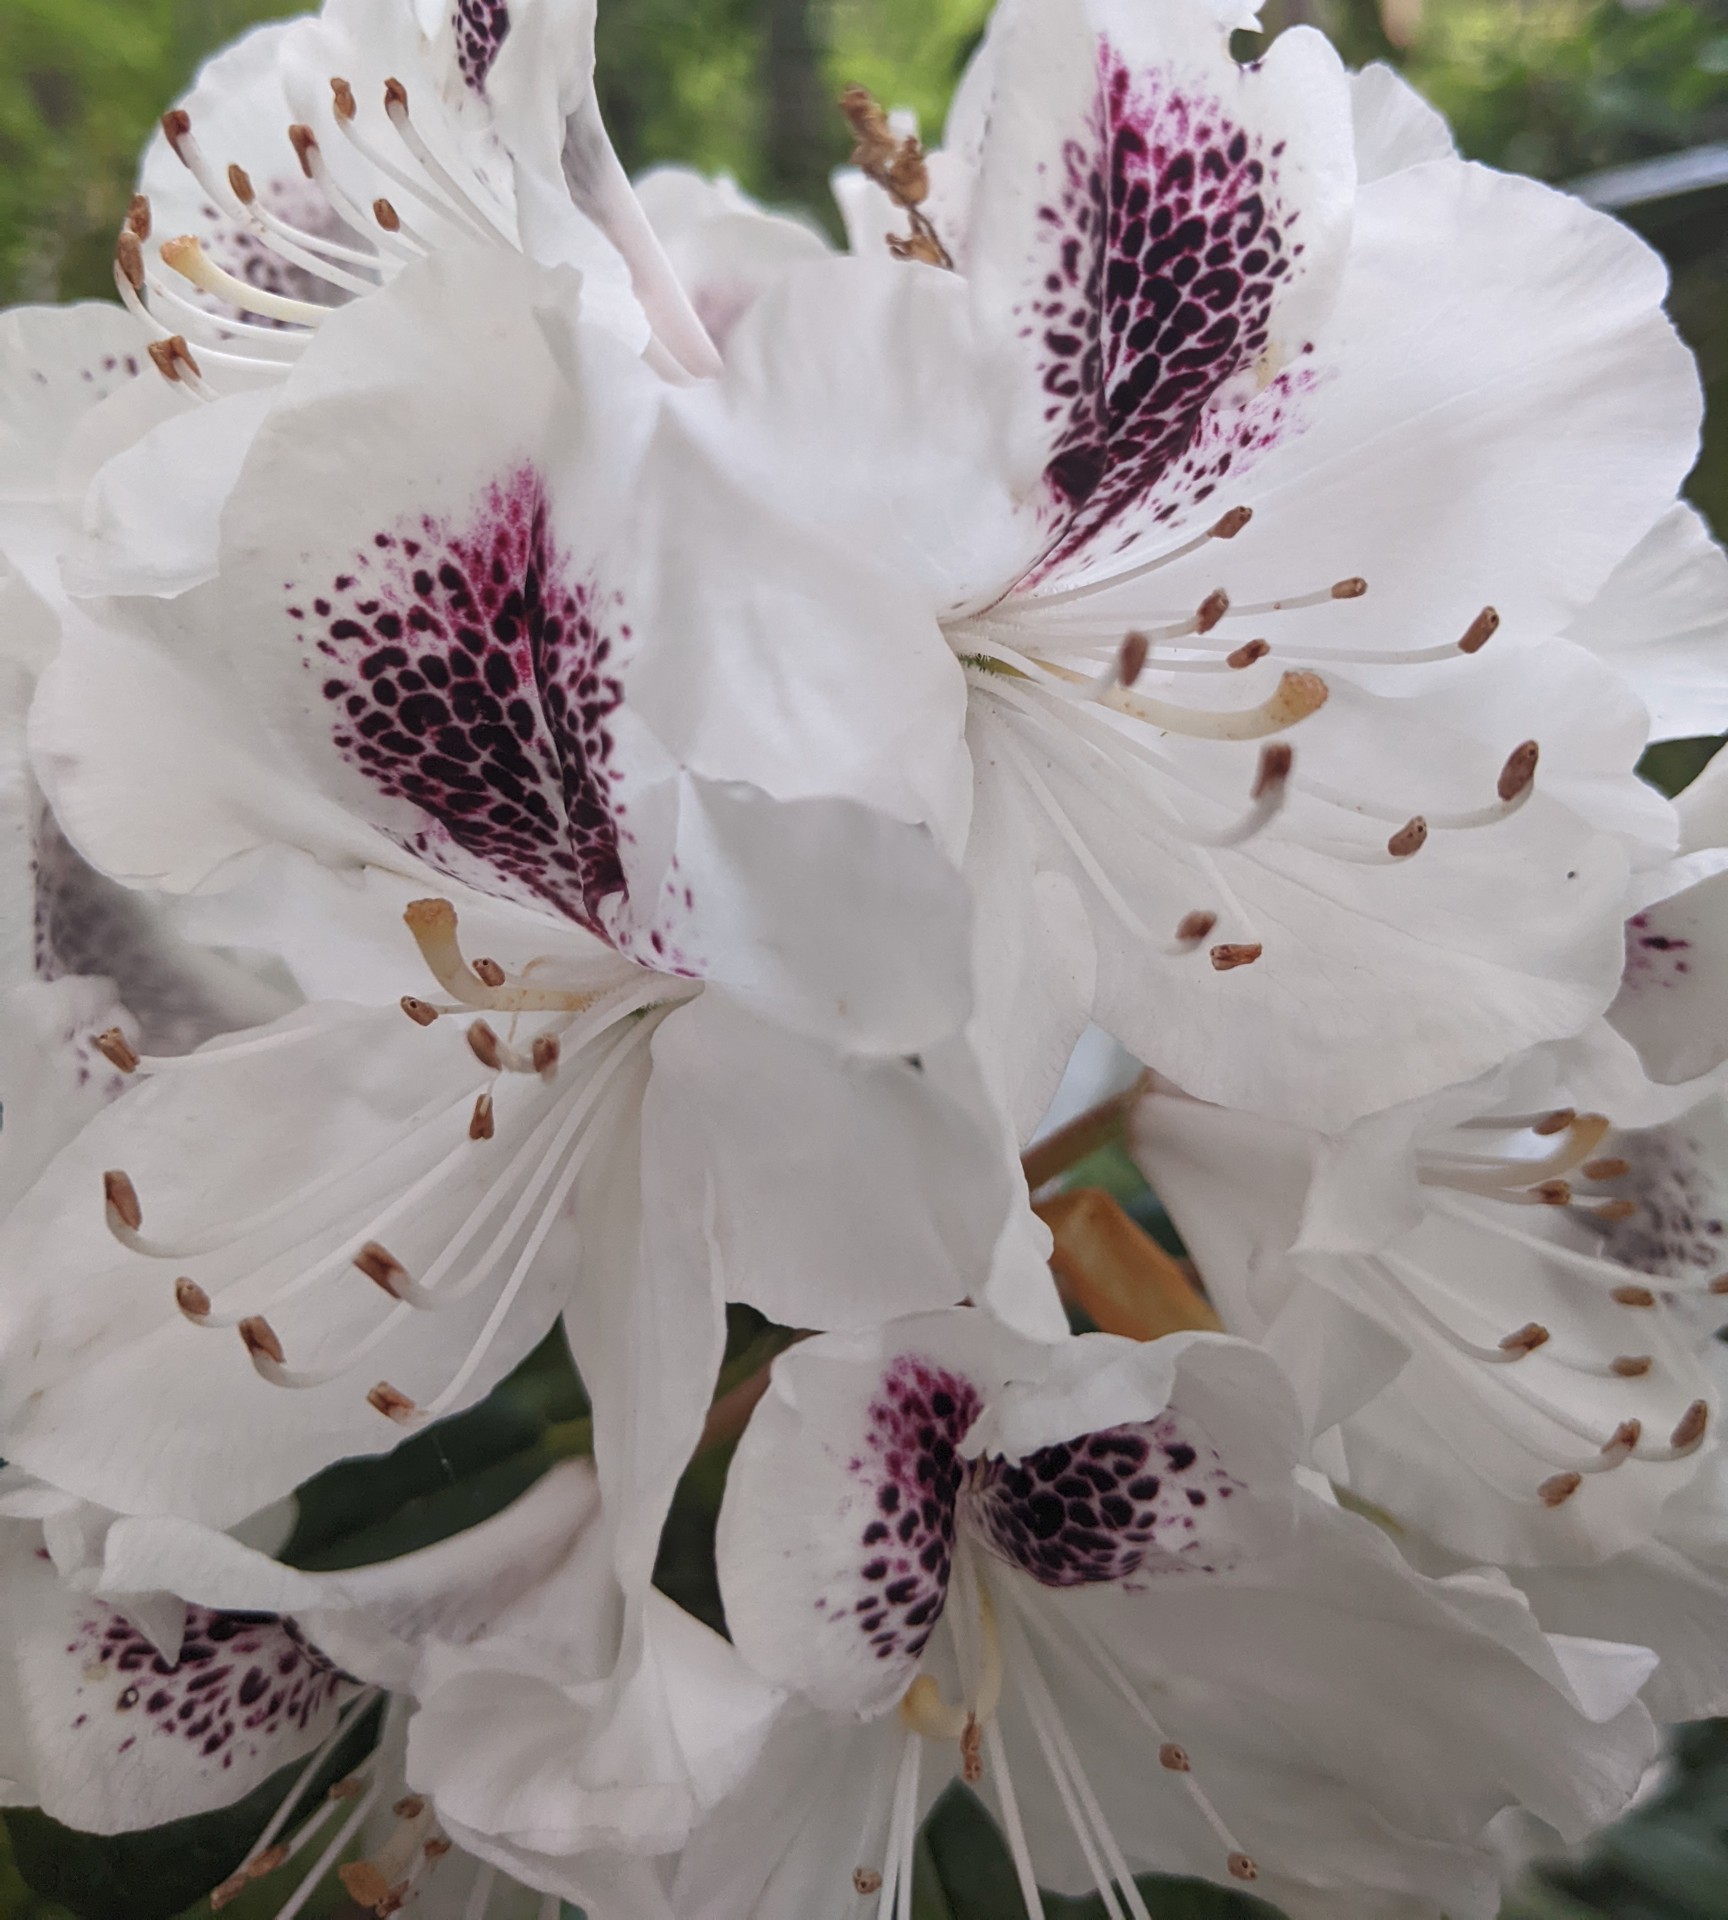 Rhododendrons with Birthmarks